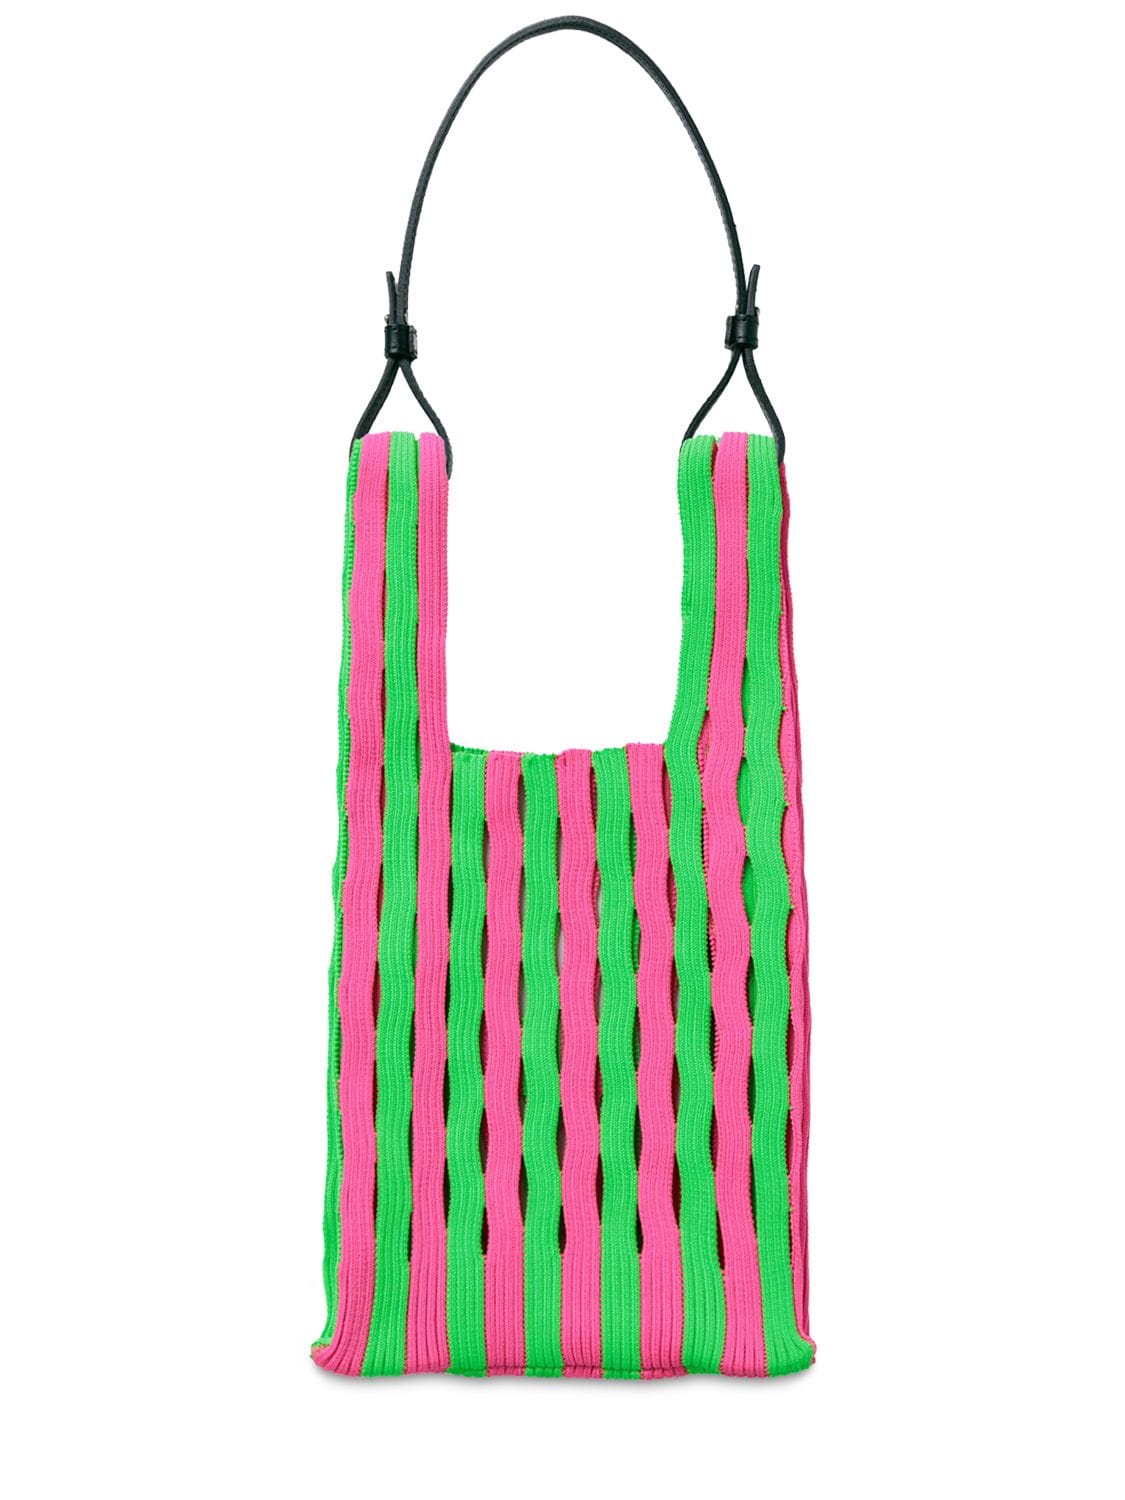 Small Striped Mesh Market Bag In Neongreen,pink